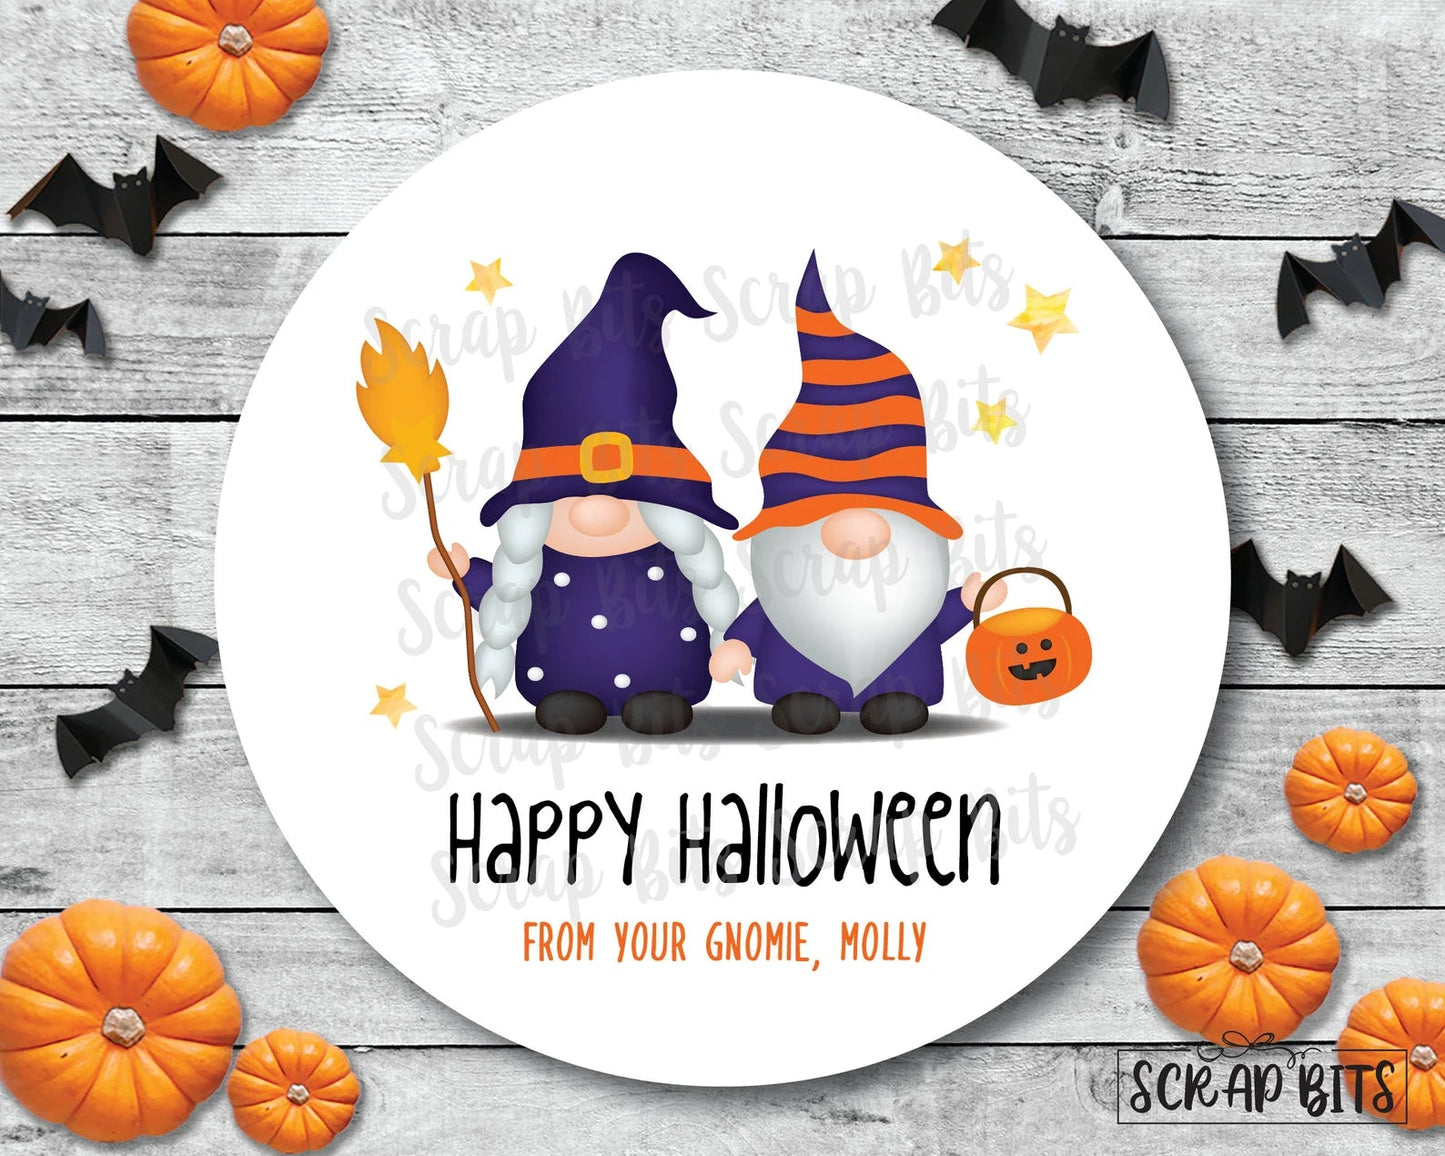 Halloween Gnomes . Halloween Treat Bag Stickers or Tags - Scrap Bits